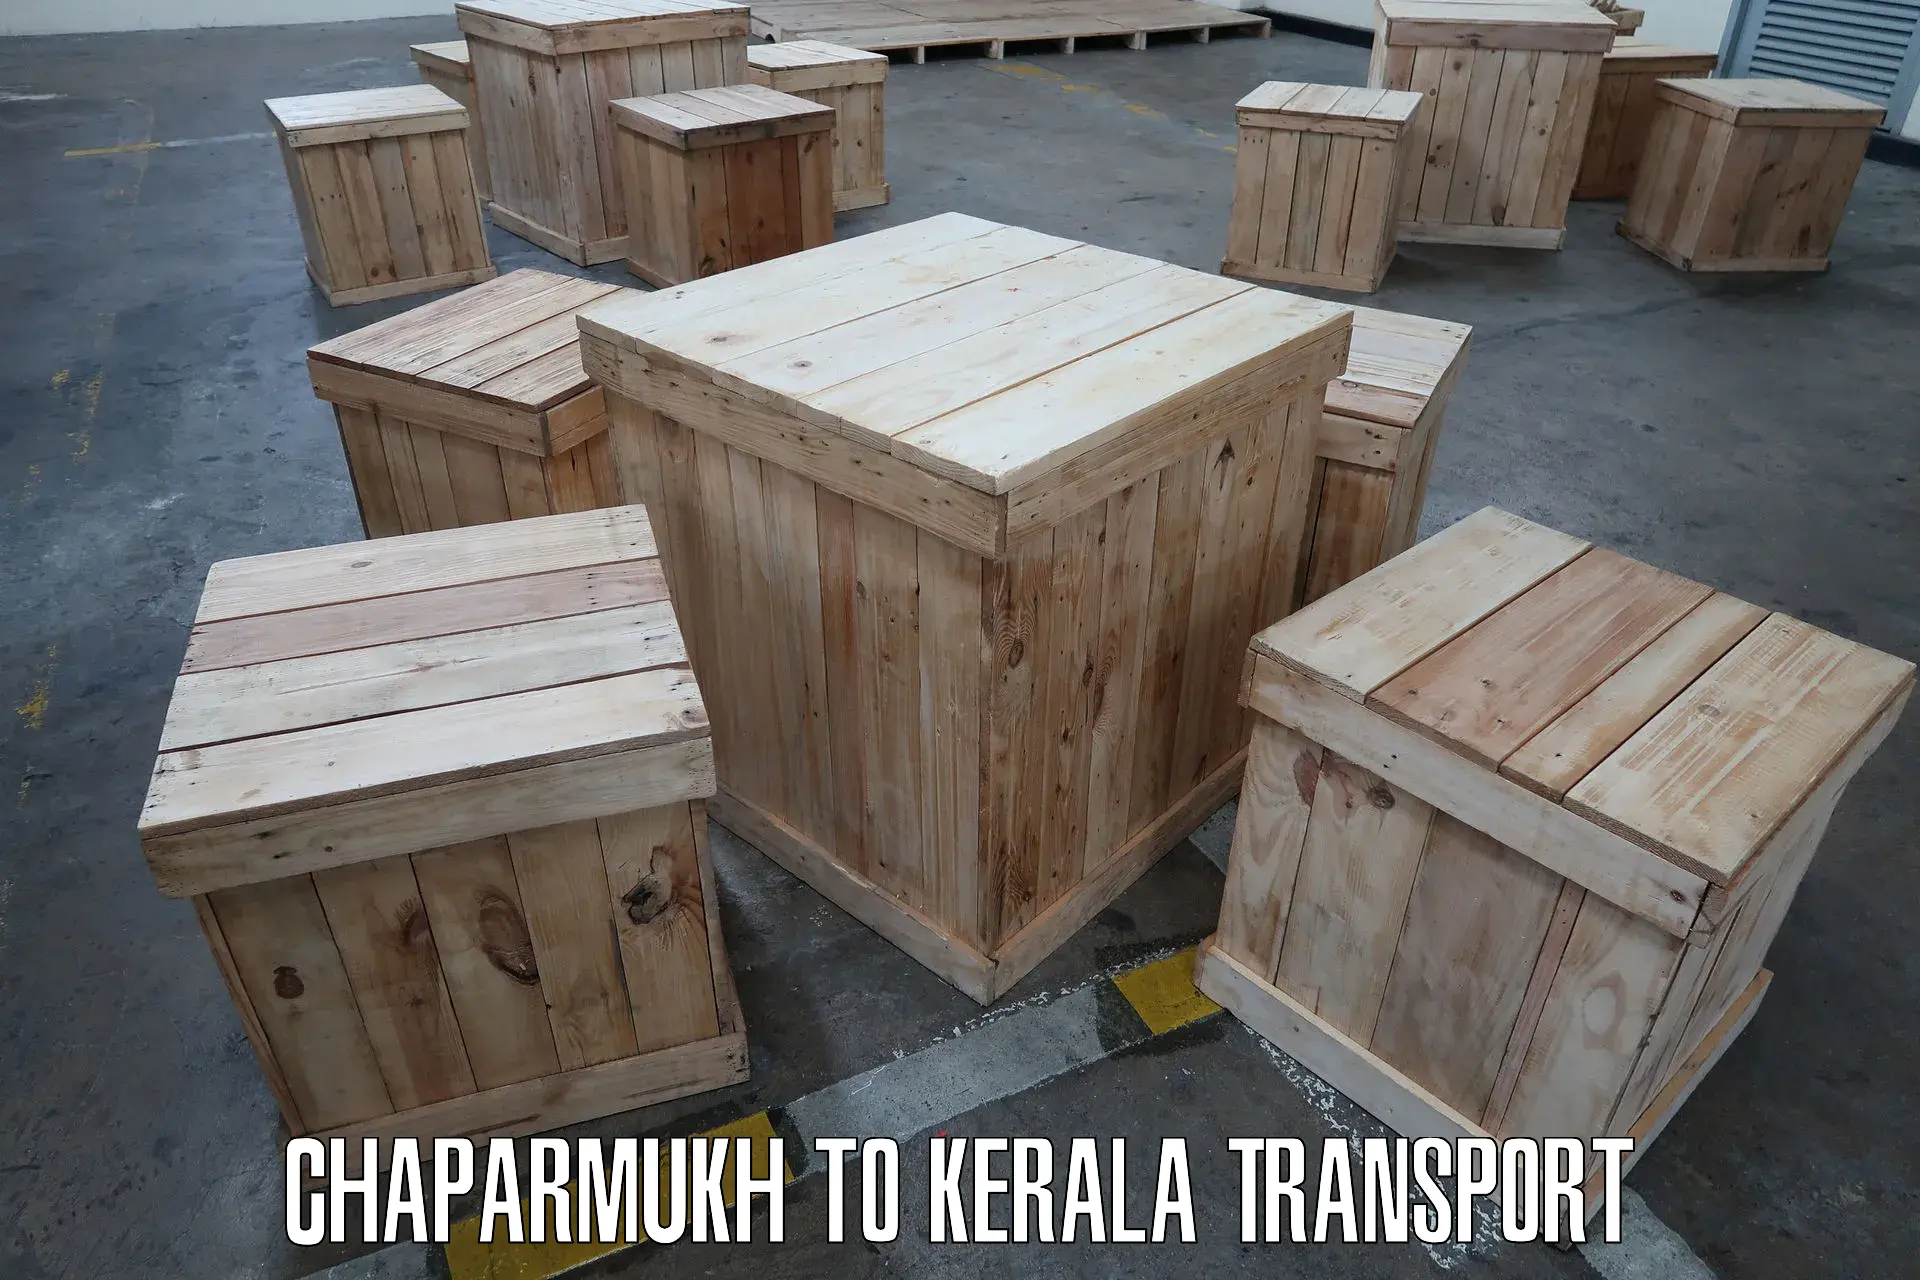 Shipping services Chaparmukh to Cochin University of Science and Technology